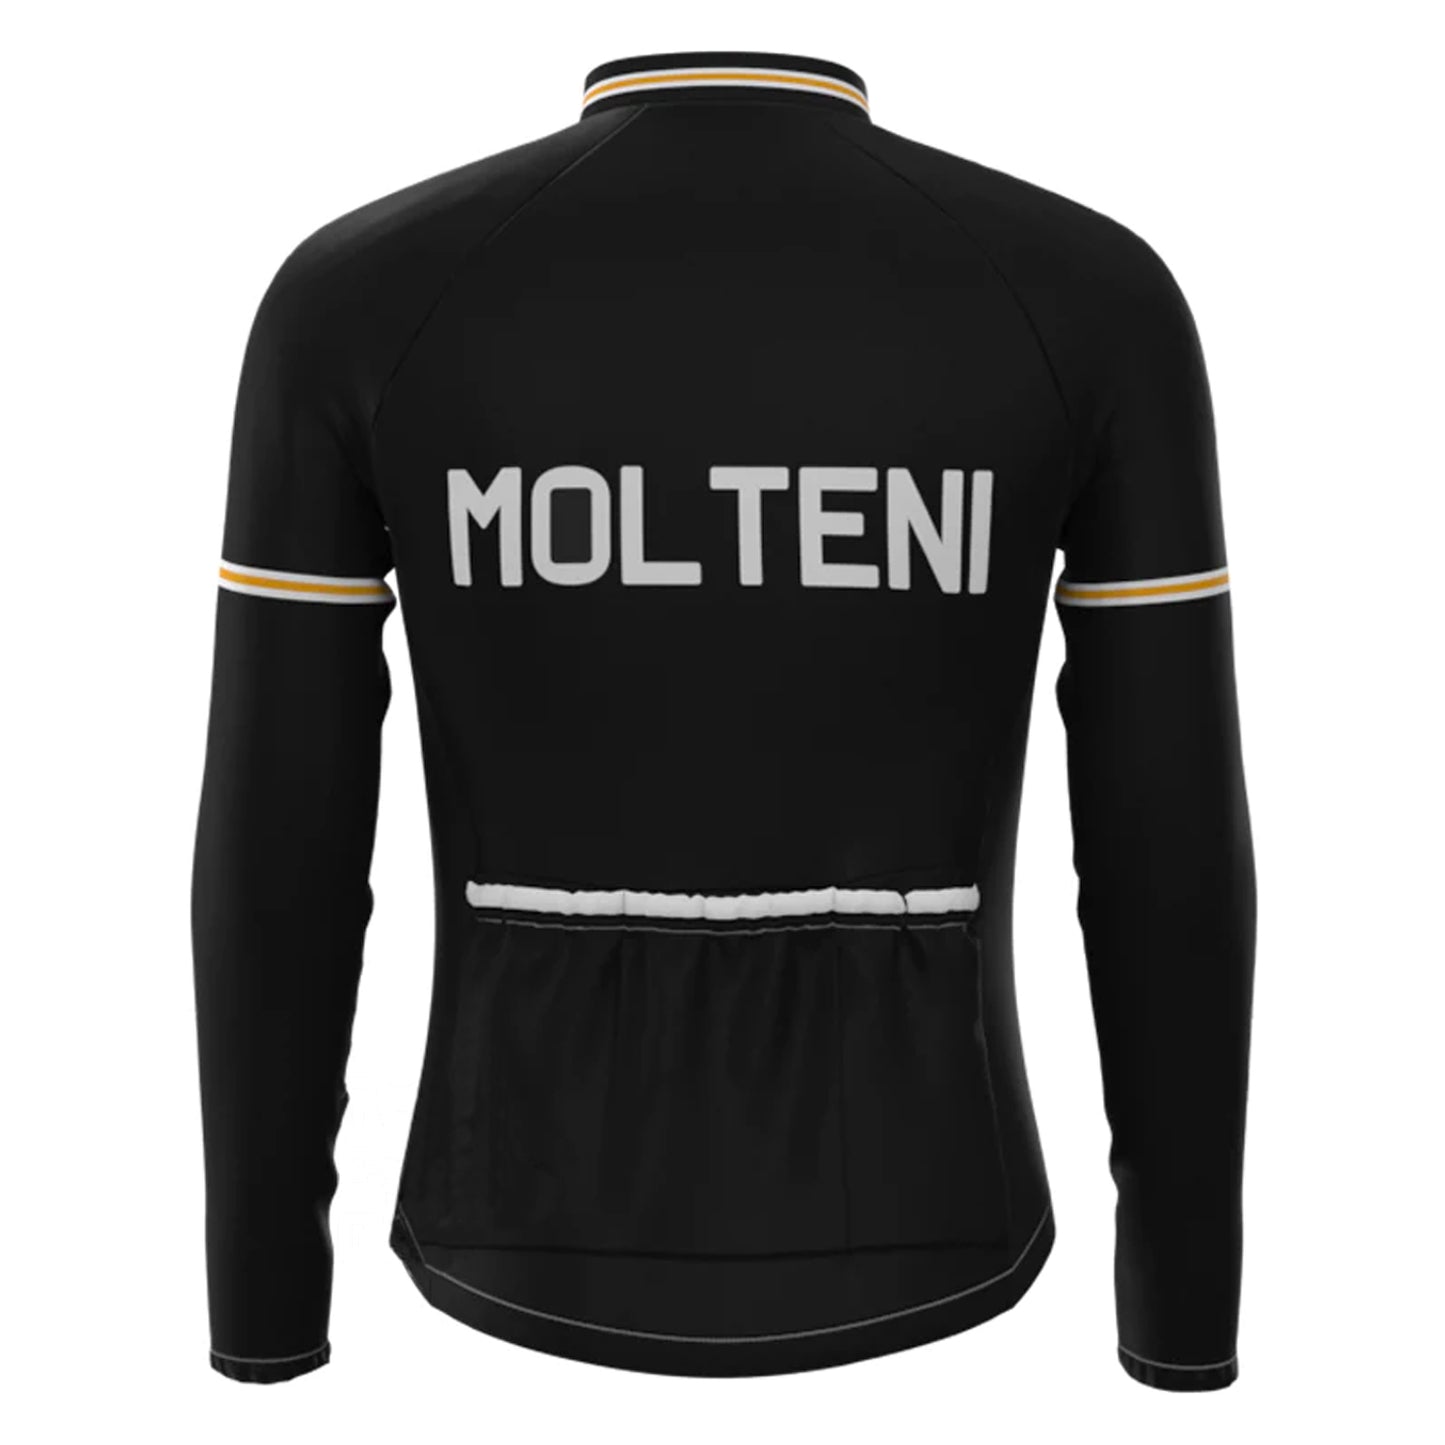 MOLTENI Black Vintage Long Sleeve Cycling Jersey Top